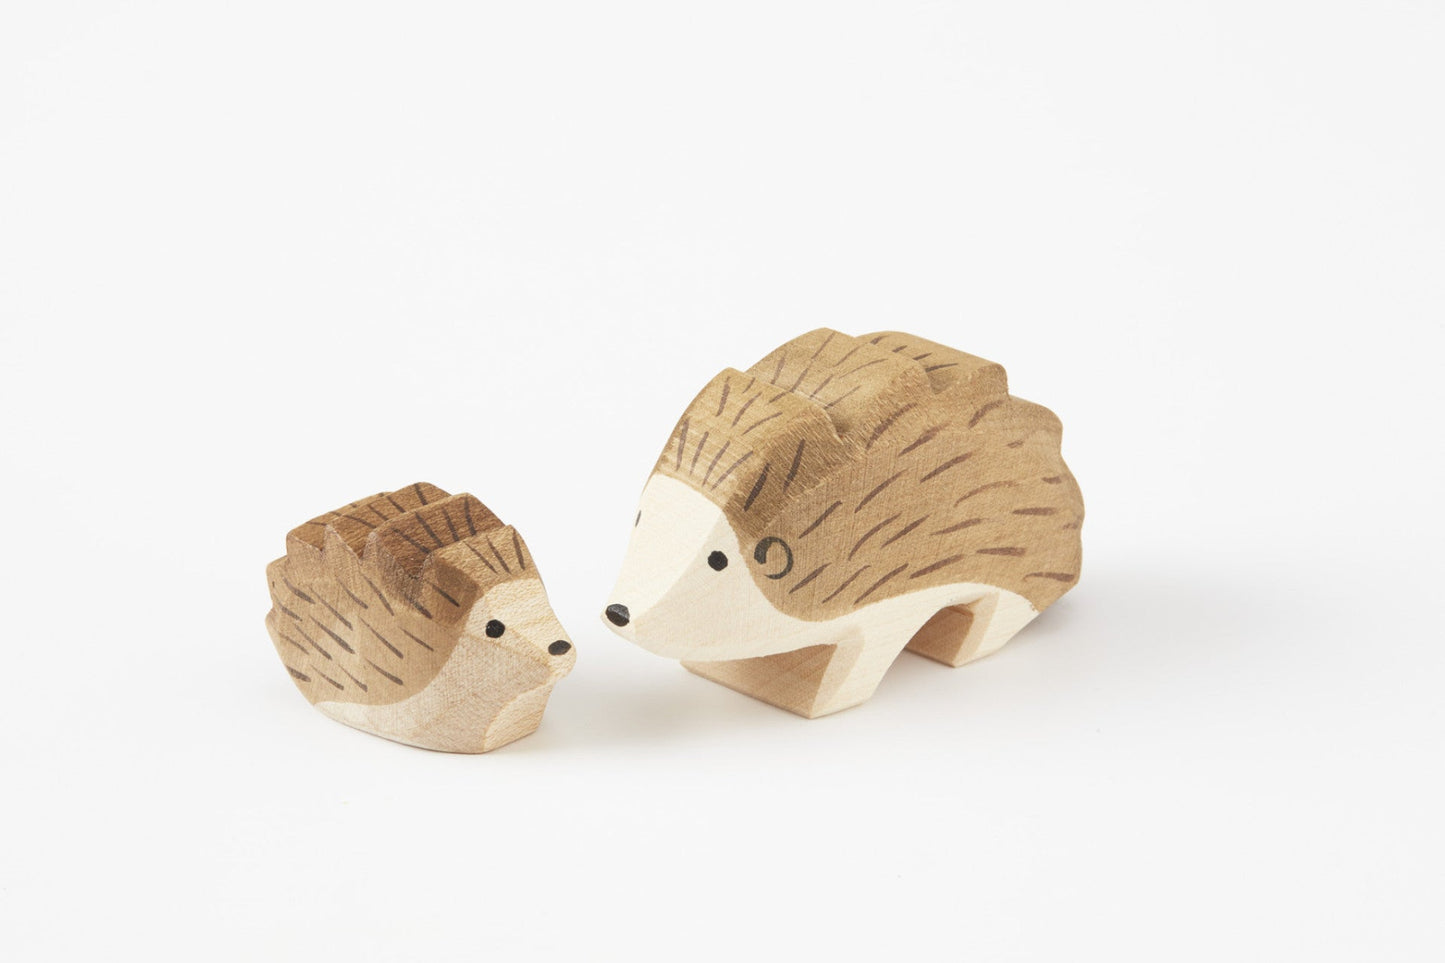 small and Large wooden hand carved Hedgehogs looking at each other on a white back ground